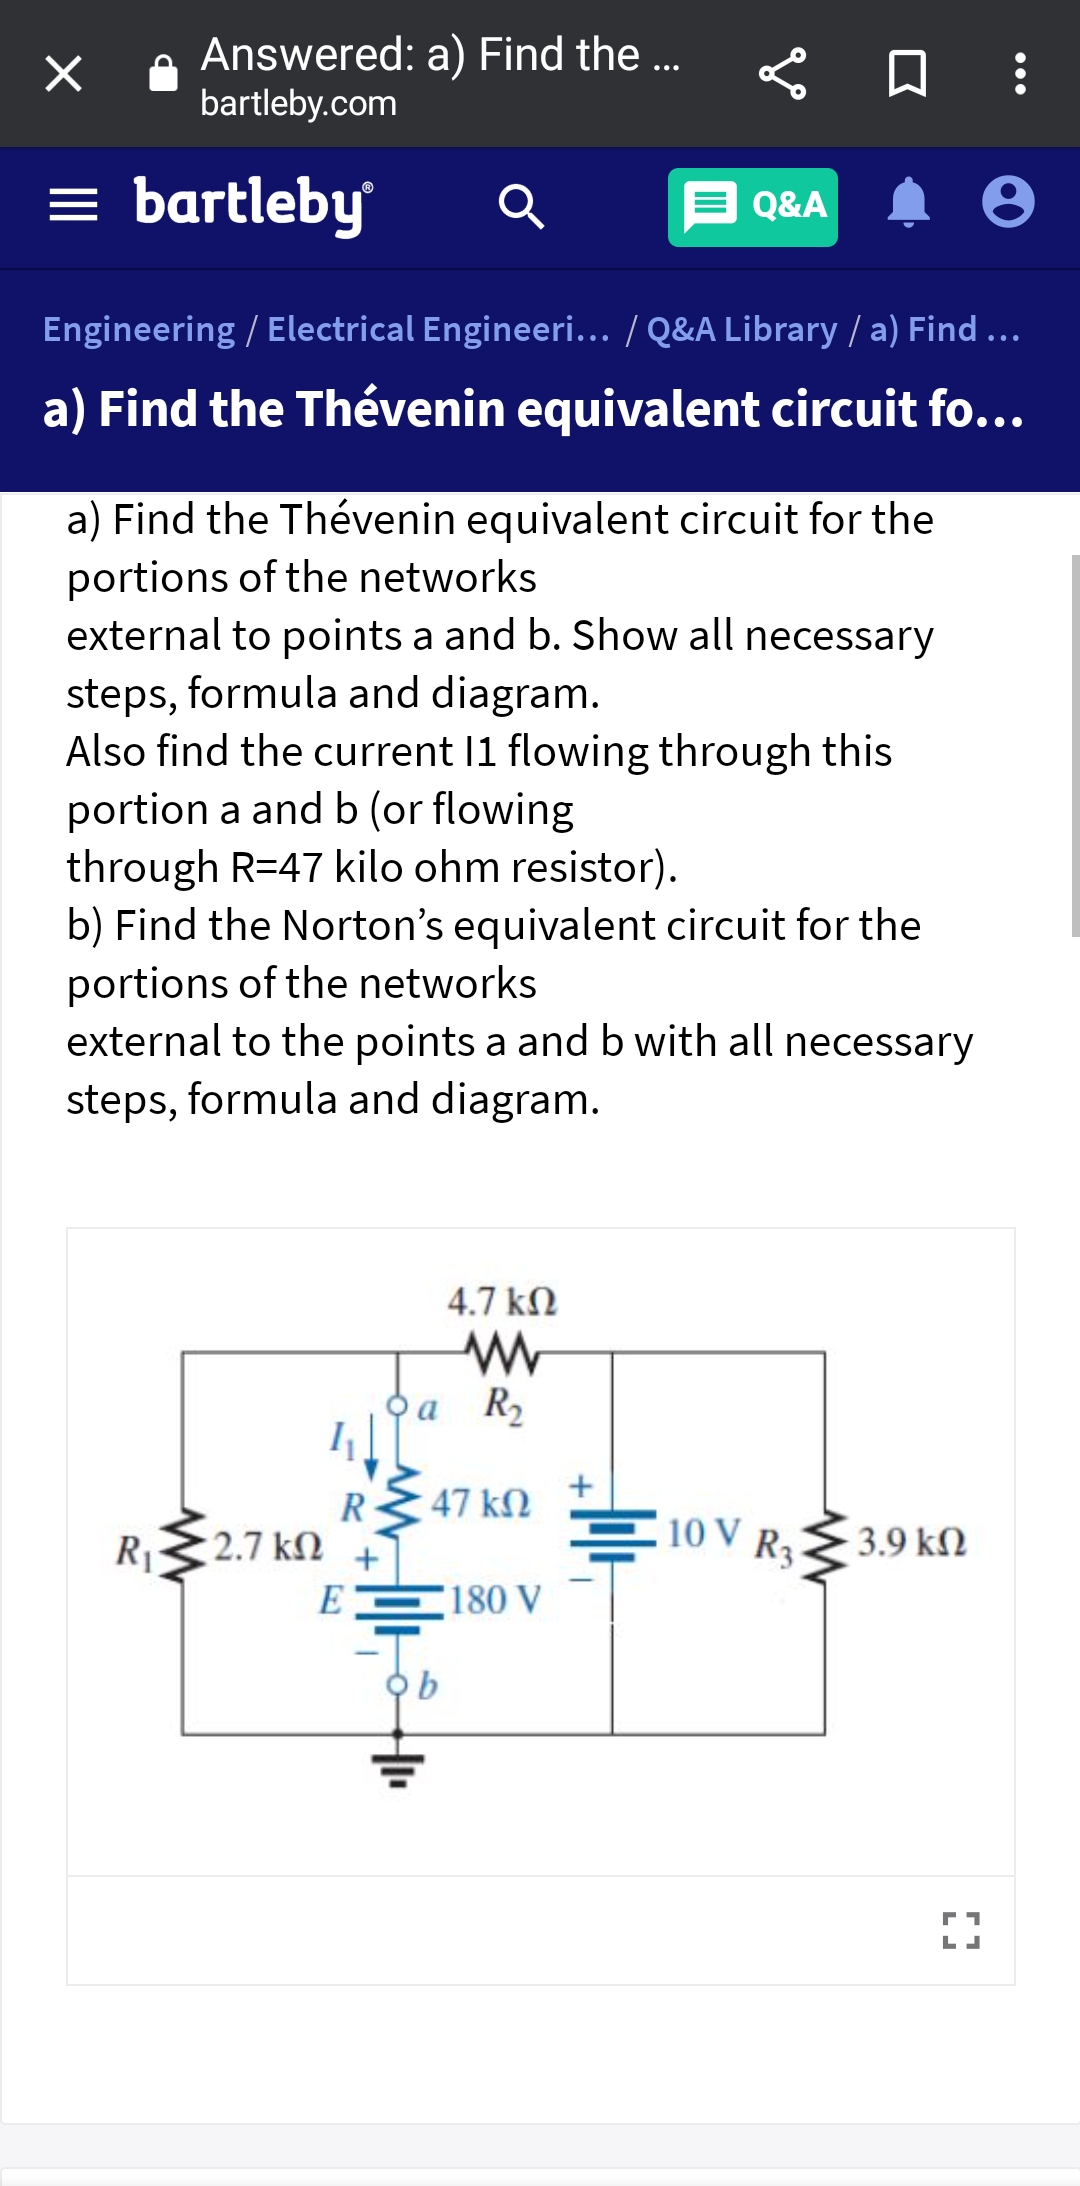 Answered: a) Find the ..
bartleby.com
= bartleby
Q&A
Engineering / Electrical Engineeri... / Q&A Library / a) Find ...
a) Find the Thévenin equivalent circuit fo...
a) Find the Thévenin equivalent circuit for the
portions of the networks
external to points a and b. Show all necessary
steps, formula and diagram.
Also find the current 11 flowing through this
portion a and b (or flowing
through R=47 kilo ohm resistor).
b) Find the Norton's equivalent circuit for the
portions of the networks
external to the points a and b with all necessary
steps, formula and diagram.
4.7 kN
Oa R2
R
47 kM ±
10 V R3
R1
2.7 kN +
3.9 kN
E
180 V
